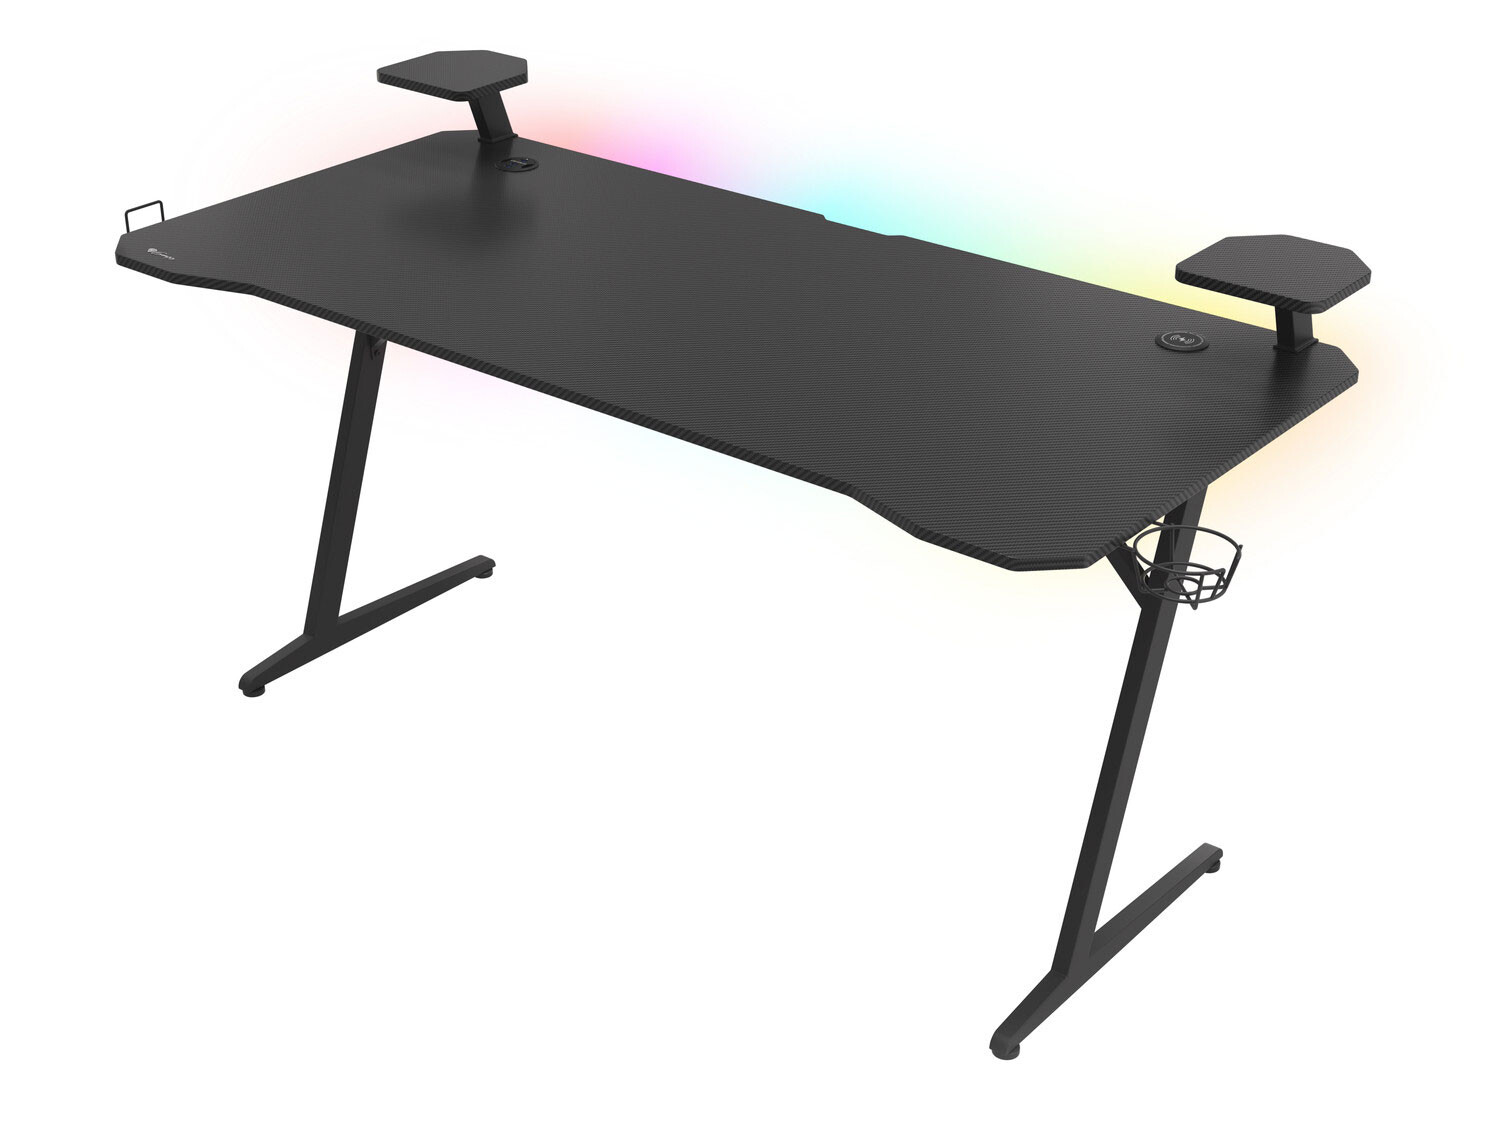 Genesis Holm 510 RGB gaming desk hands-on: More than just a lot of